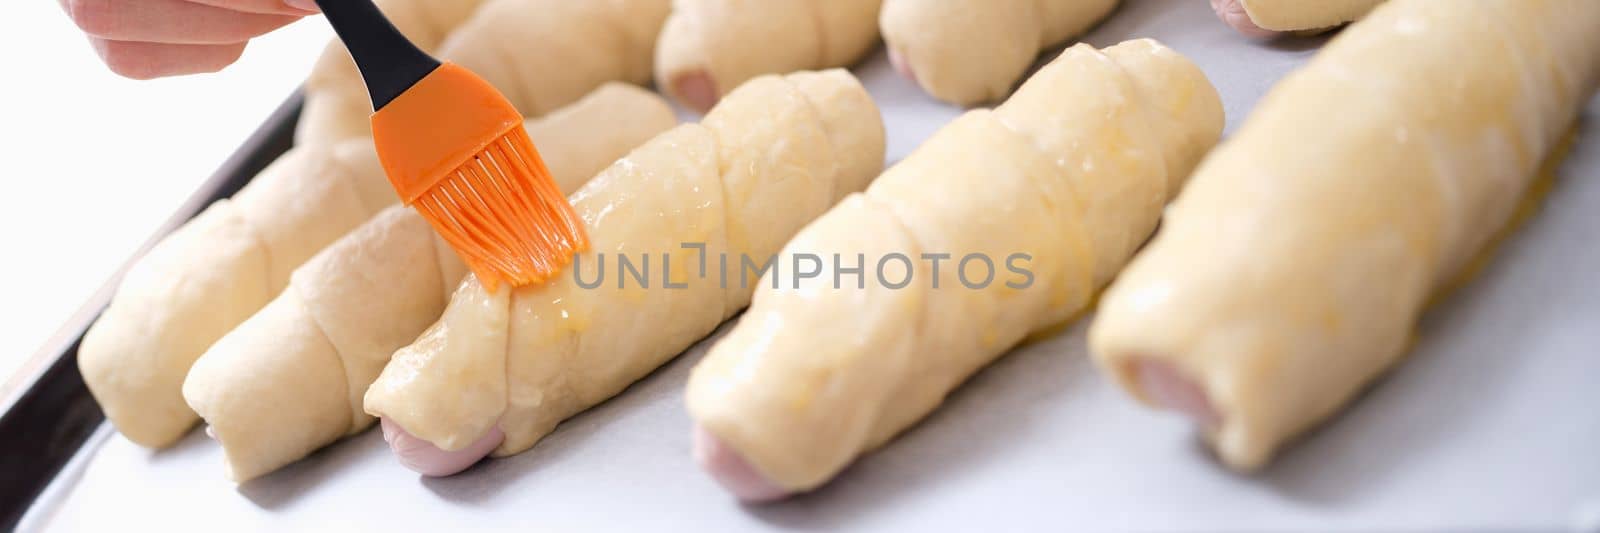 Female cook greases sheet of dough with melted butter and prepares sausage wrapped in dough. Delicious snack and cooking hot dog concept